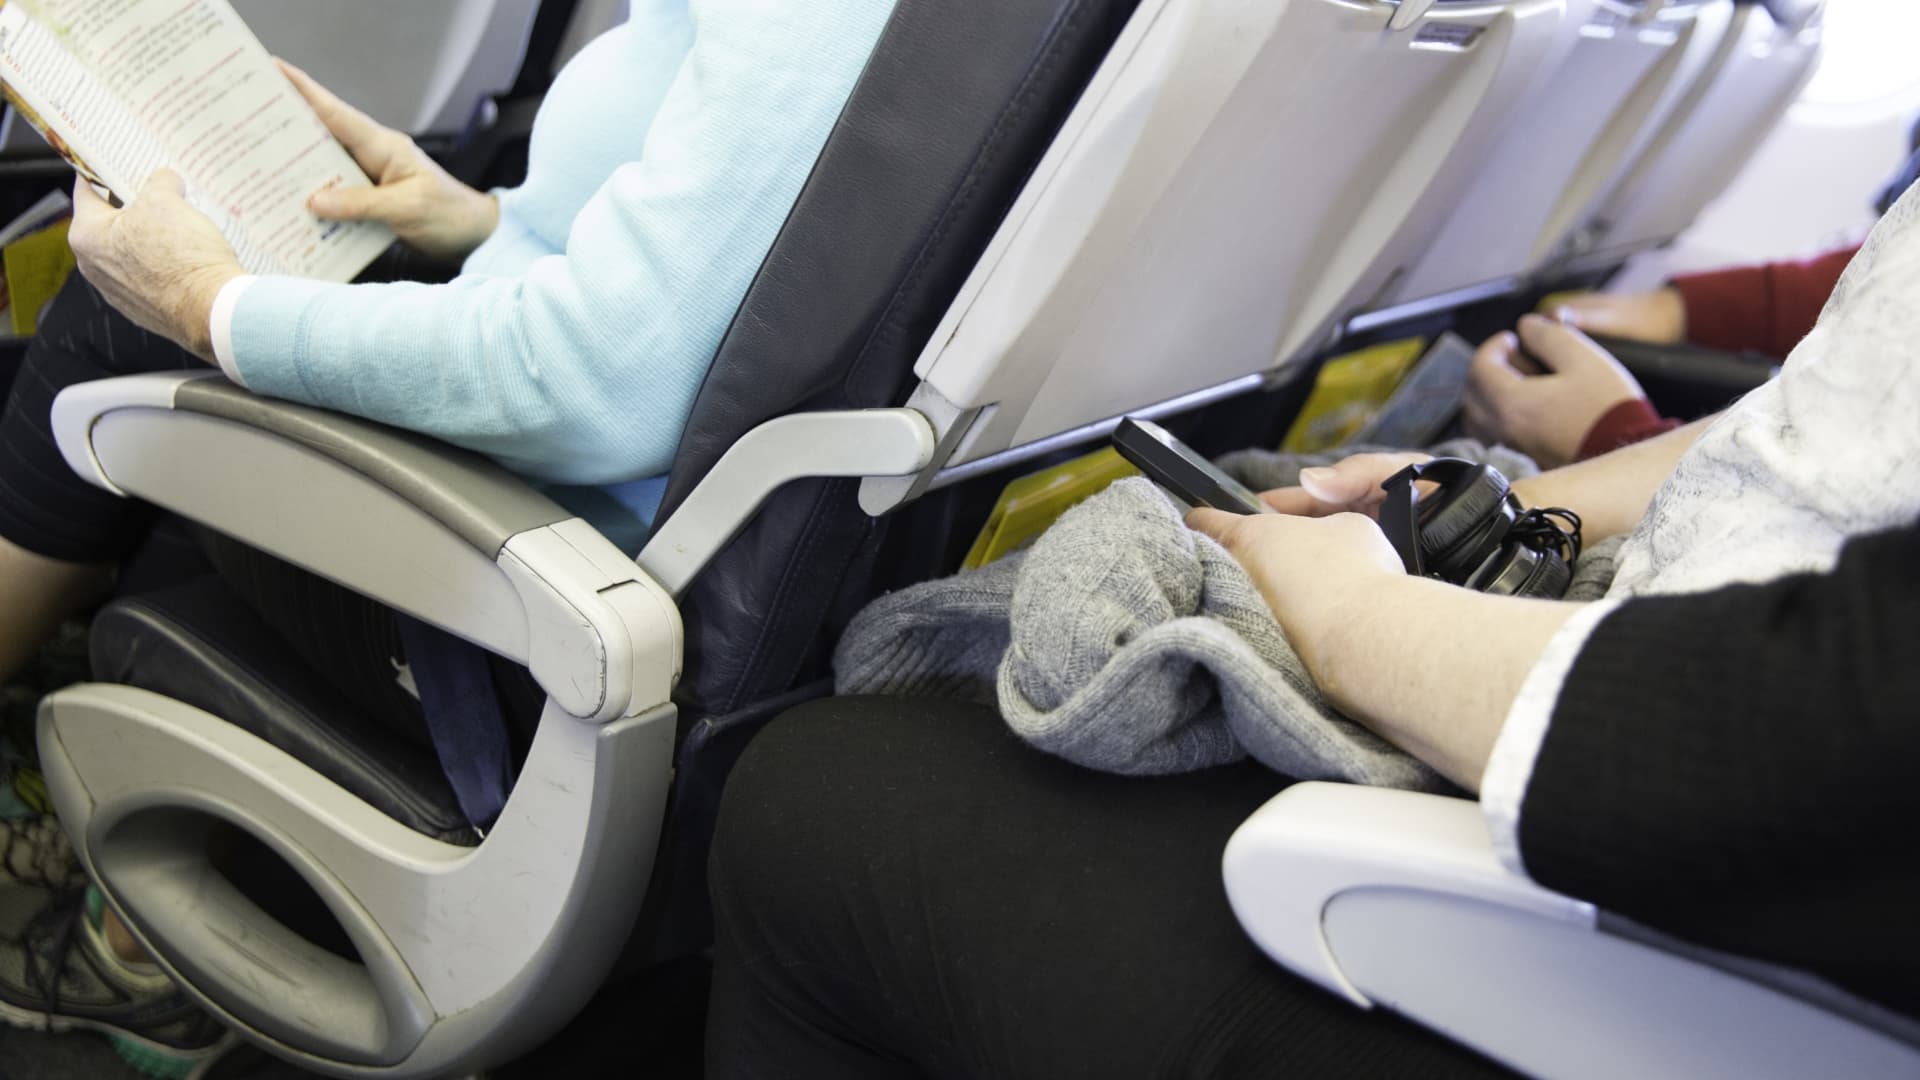 As people have gotten bigger, airline seats have gotten smaller, which has led to frequent complaints from air travelers of all sizes.